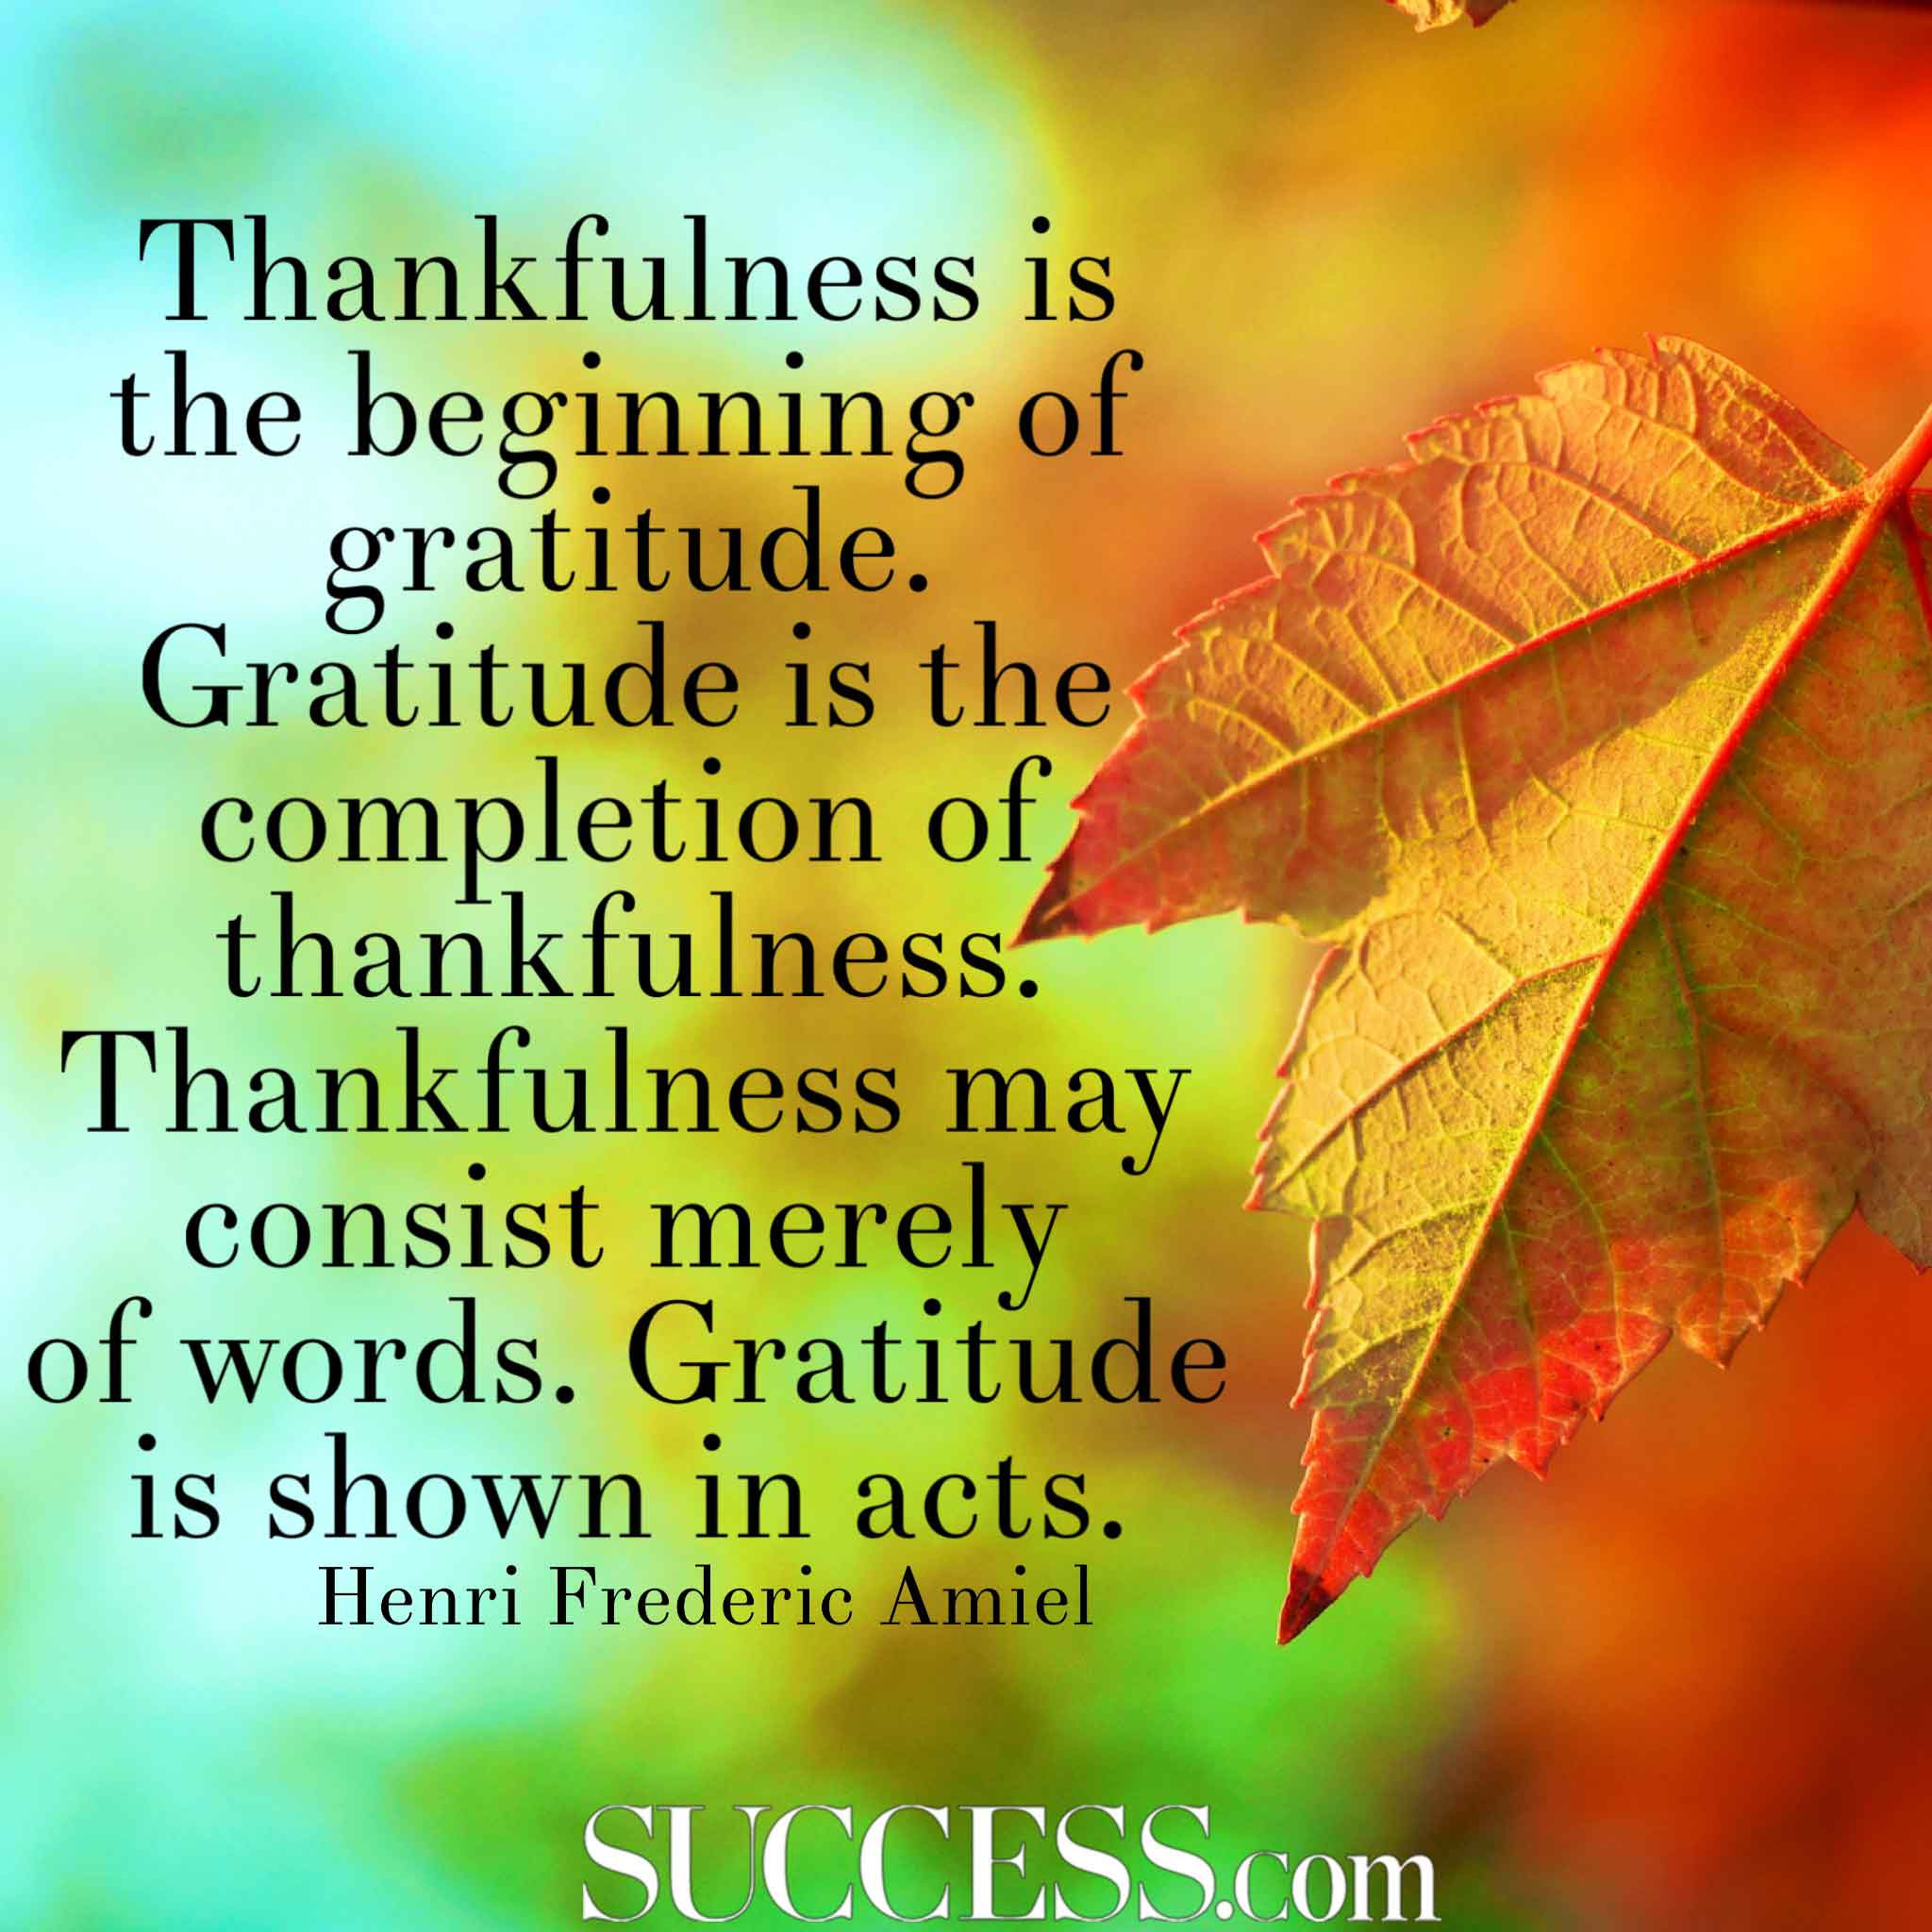 Quotes On Thanksgiving And Gratitude
 32 Quotes about Gratitude ActionJacquelyn